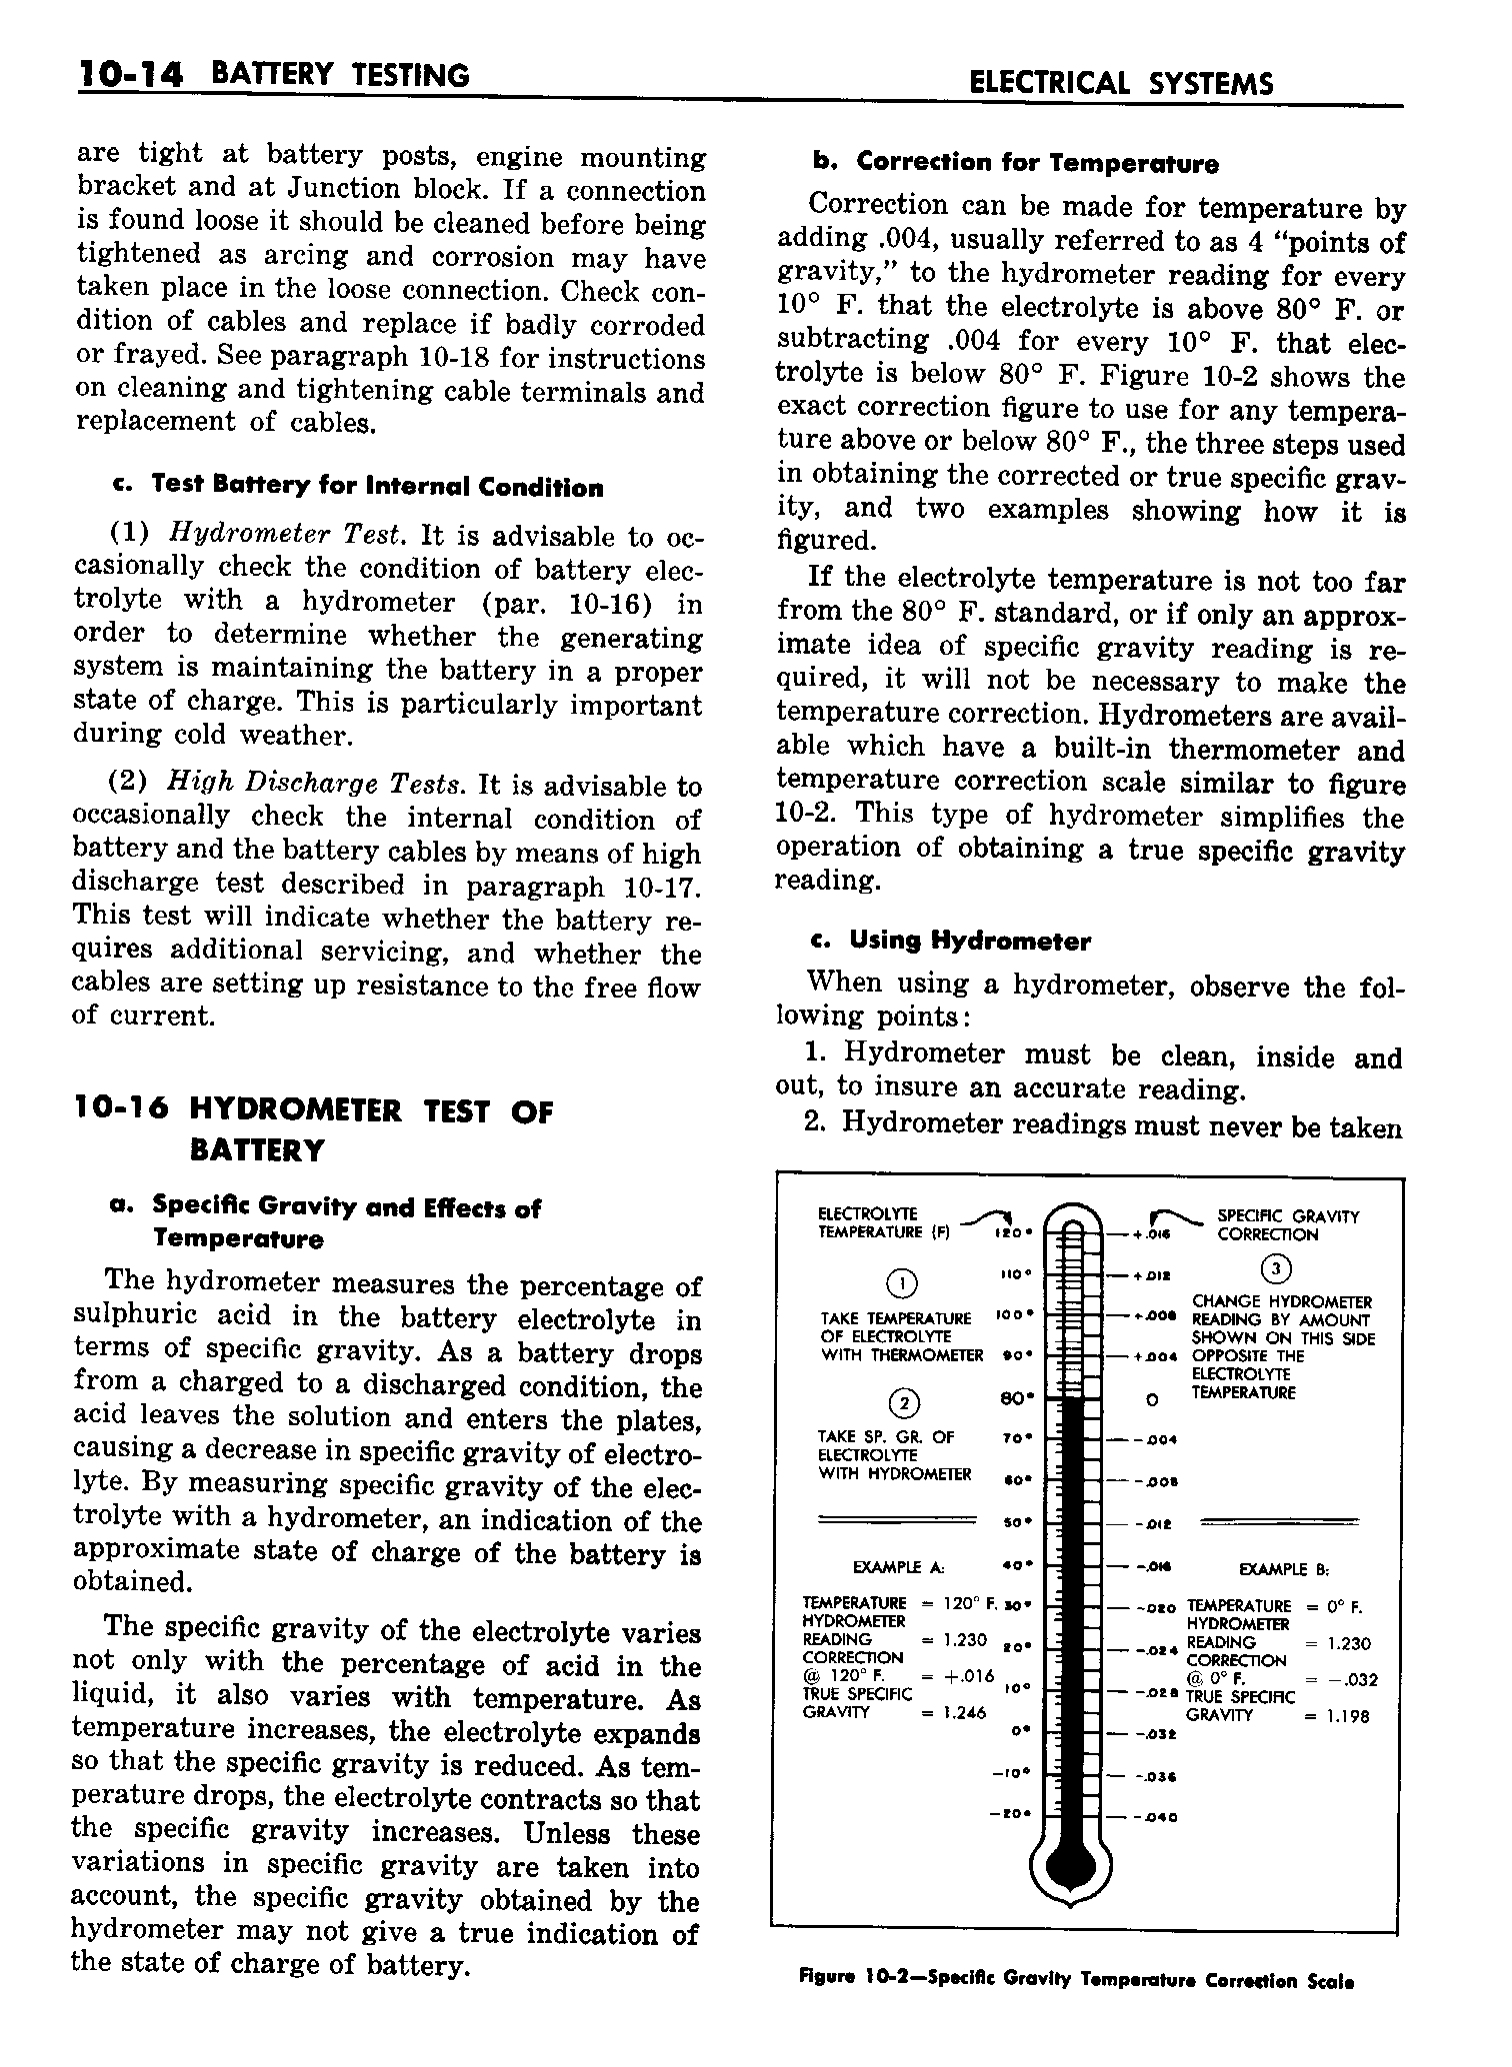 n_11 1958 Buick Shop Manual - Electrical Systems_14.jpg